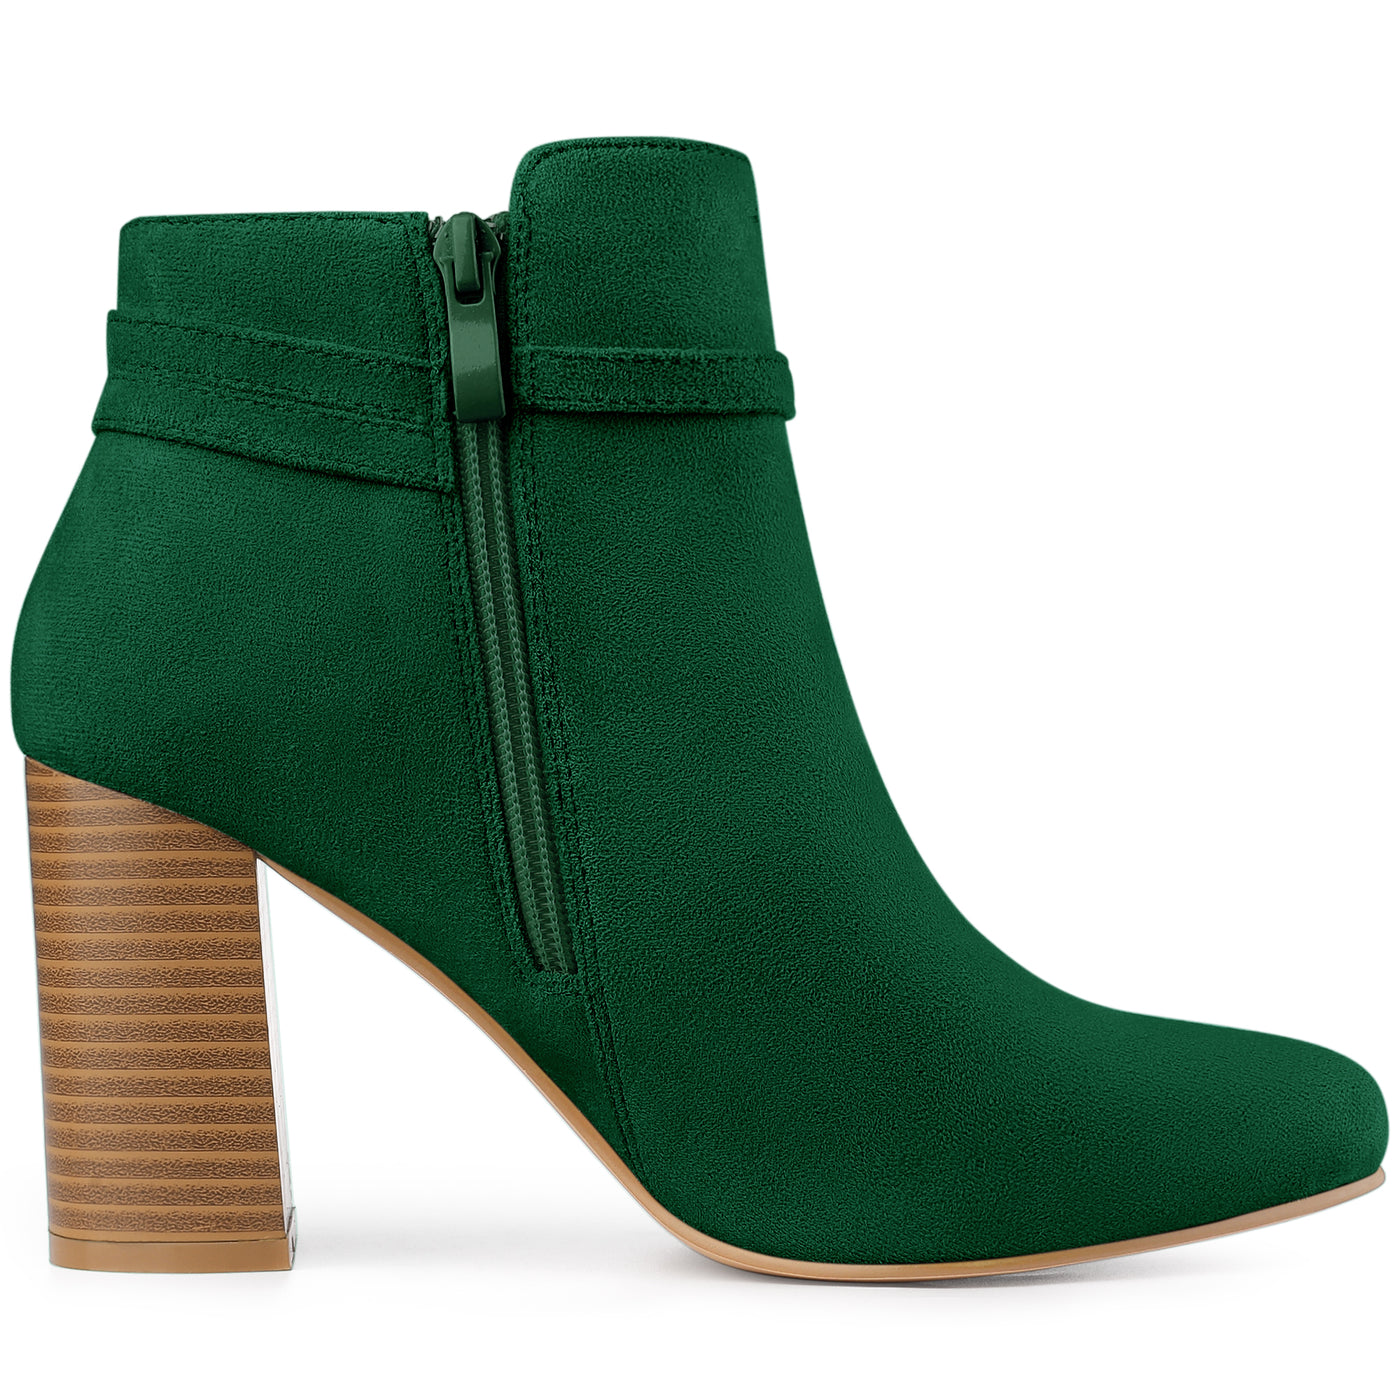 Allegra K Round Toe Buckle Chunky Heel Ankle Boots